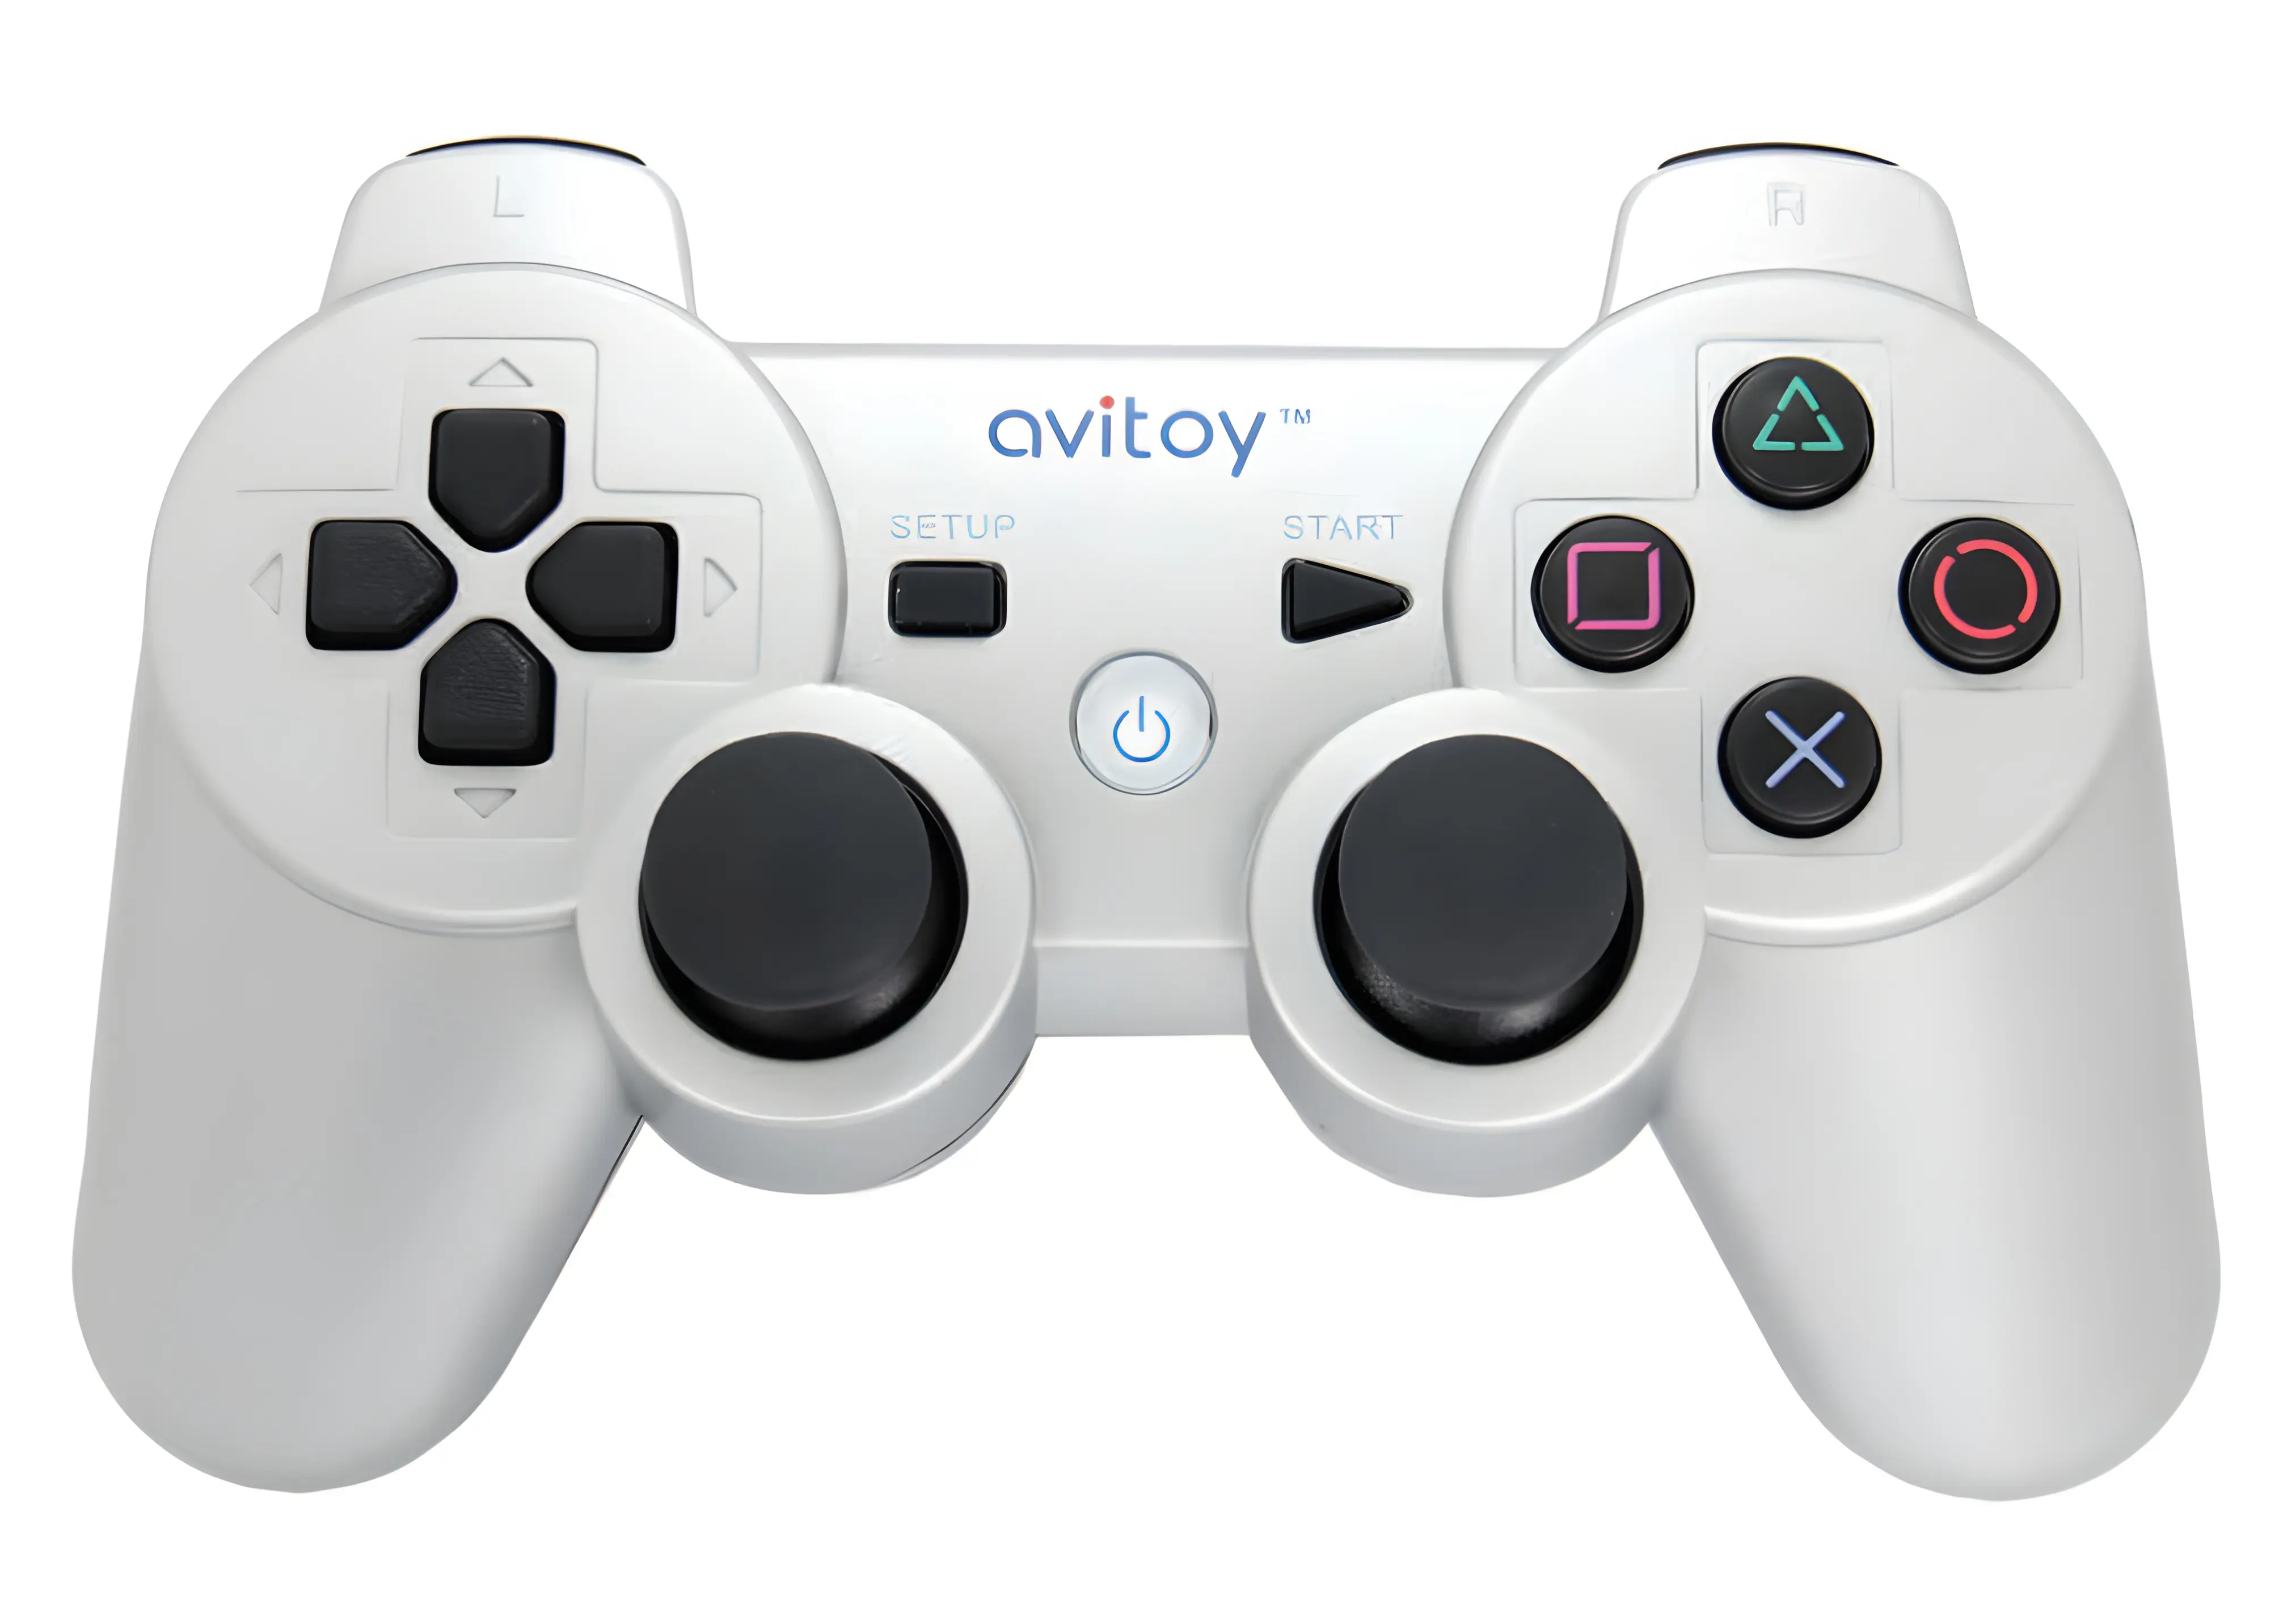 How to pair the Avitoy p3 Bluetooth controller